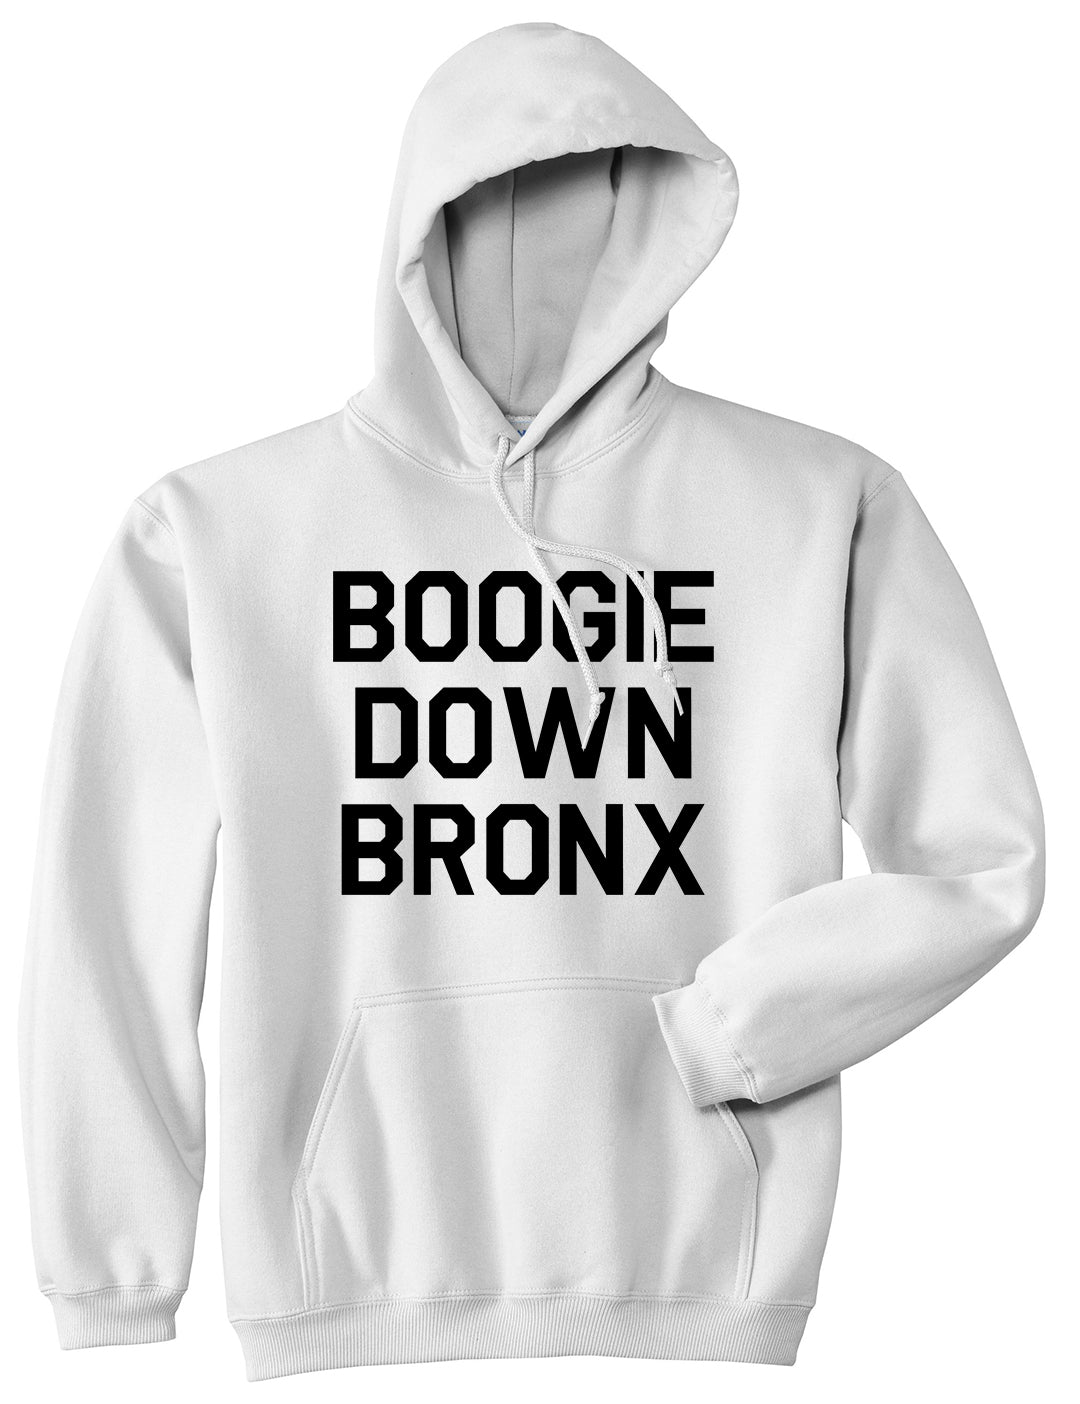 Boogie Down Bronx Mens Pullover Hoodie White by Kings Of NY